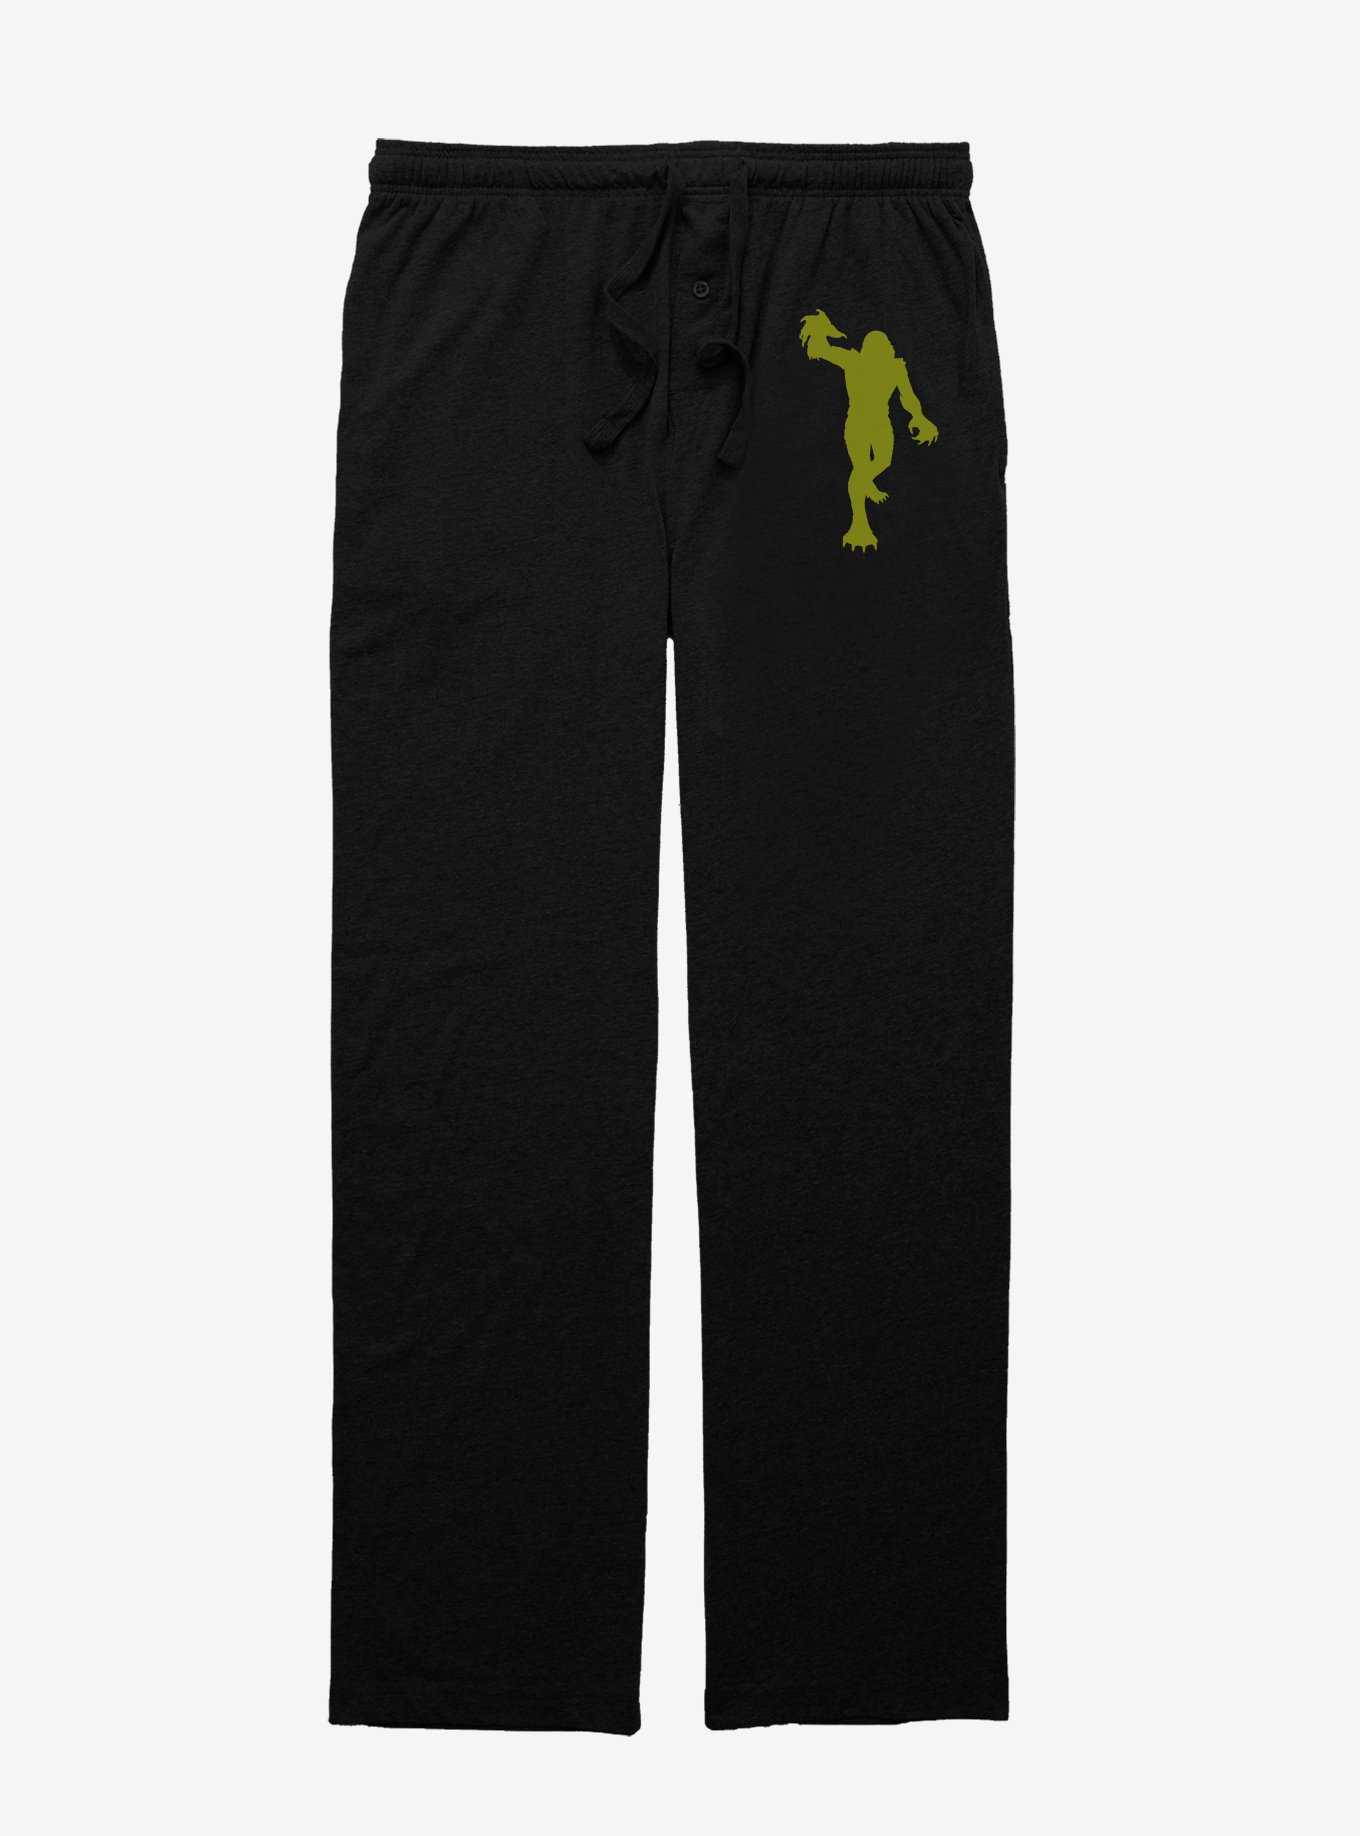 Creature From The Black Lagoon Silhouette Pajama Pants, , hi-res